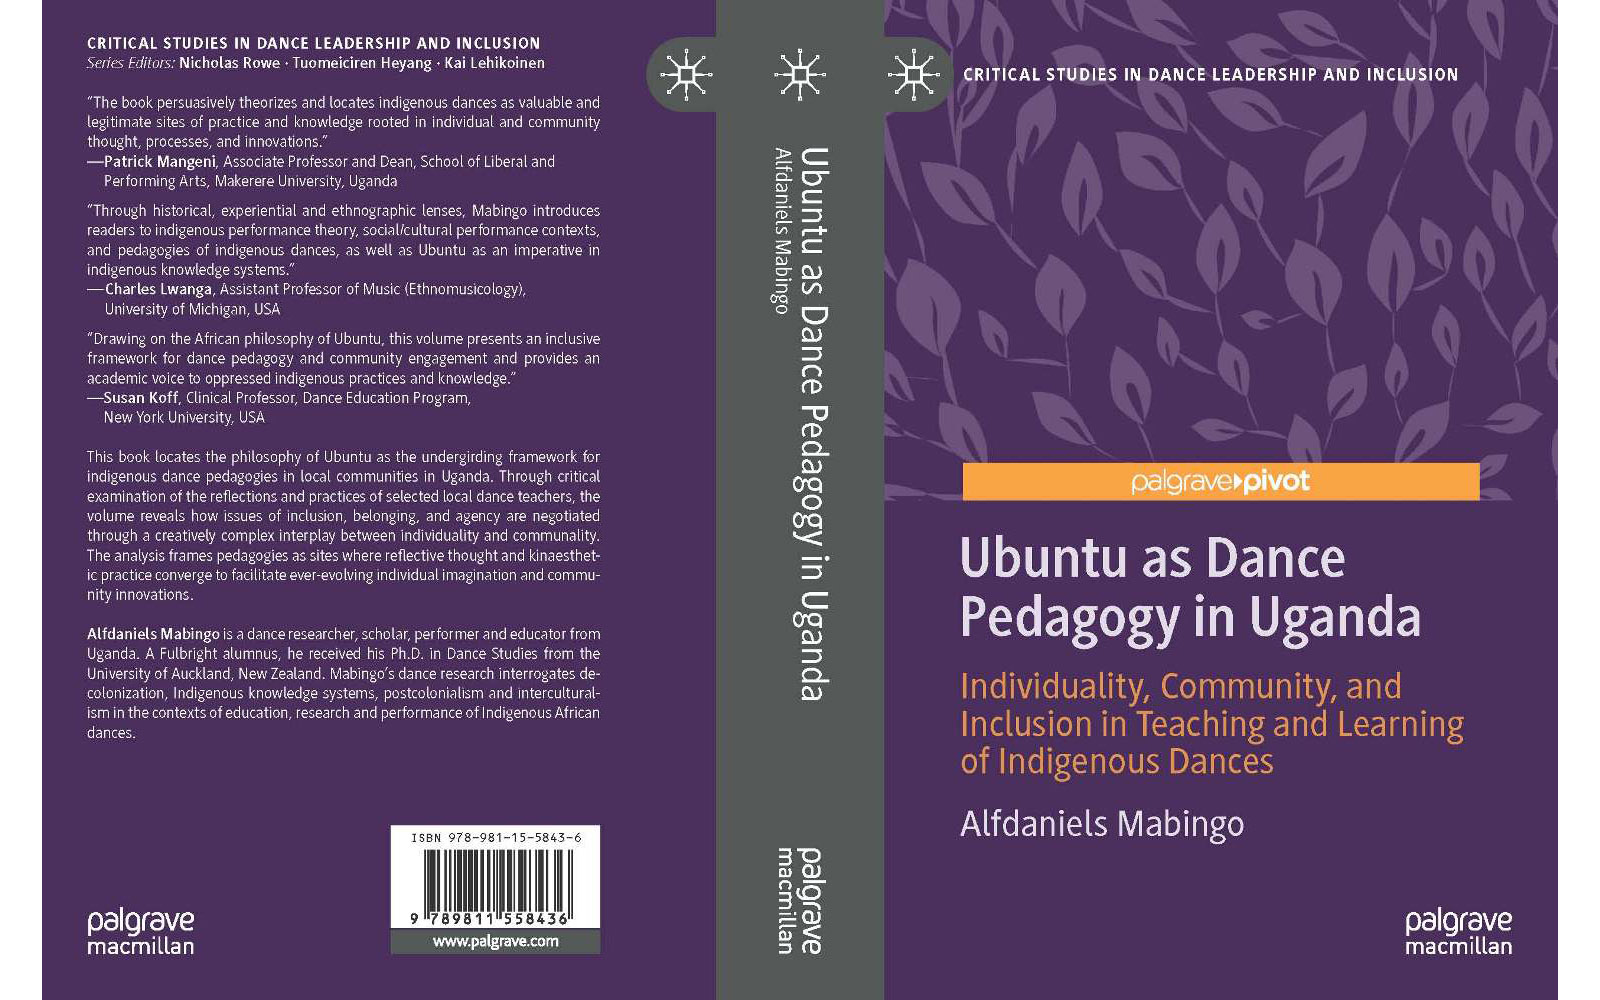 'Ubuntu as Dance Pedagogy in Uganda: Individuality, Community, and Inclusion in Teaching and Learning of Indigenous Dances' by Alfdaniels Mabingo, Ph.D. Department of Performing Arts and Film, Makerere University.